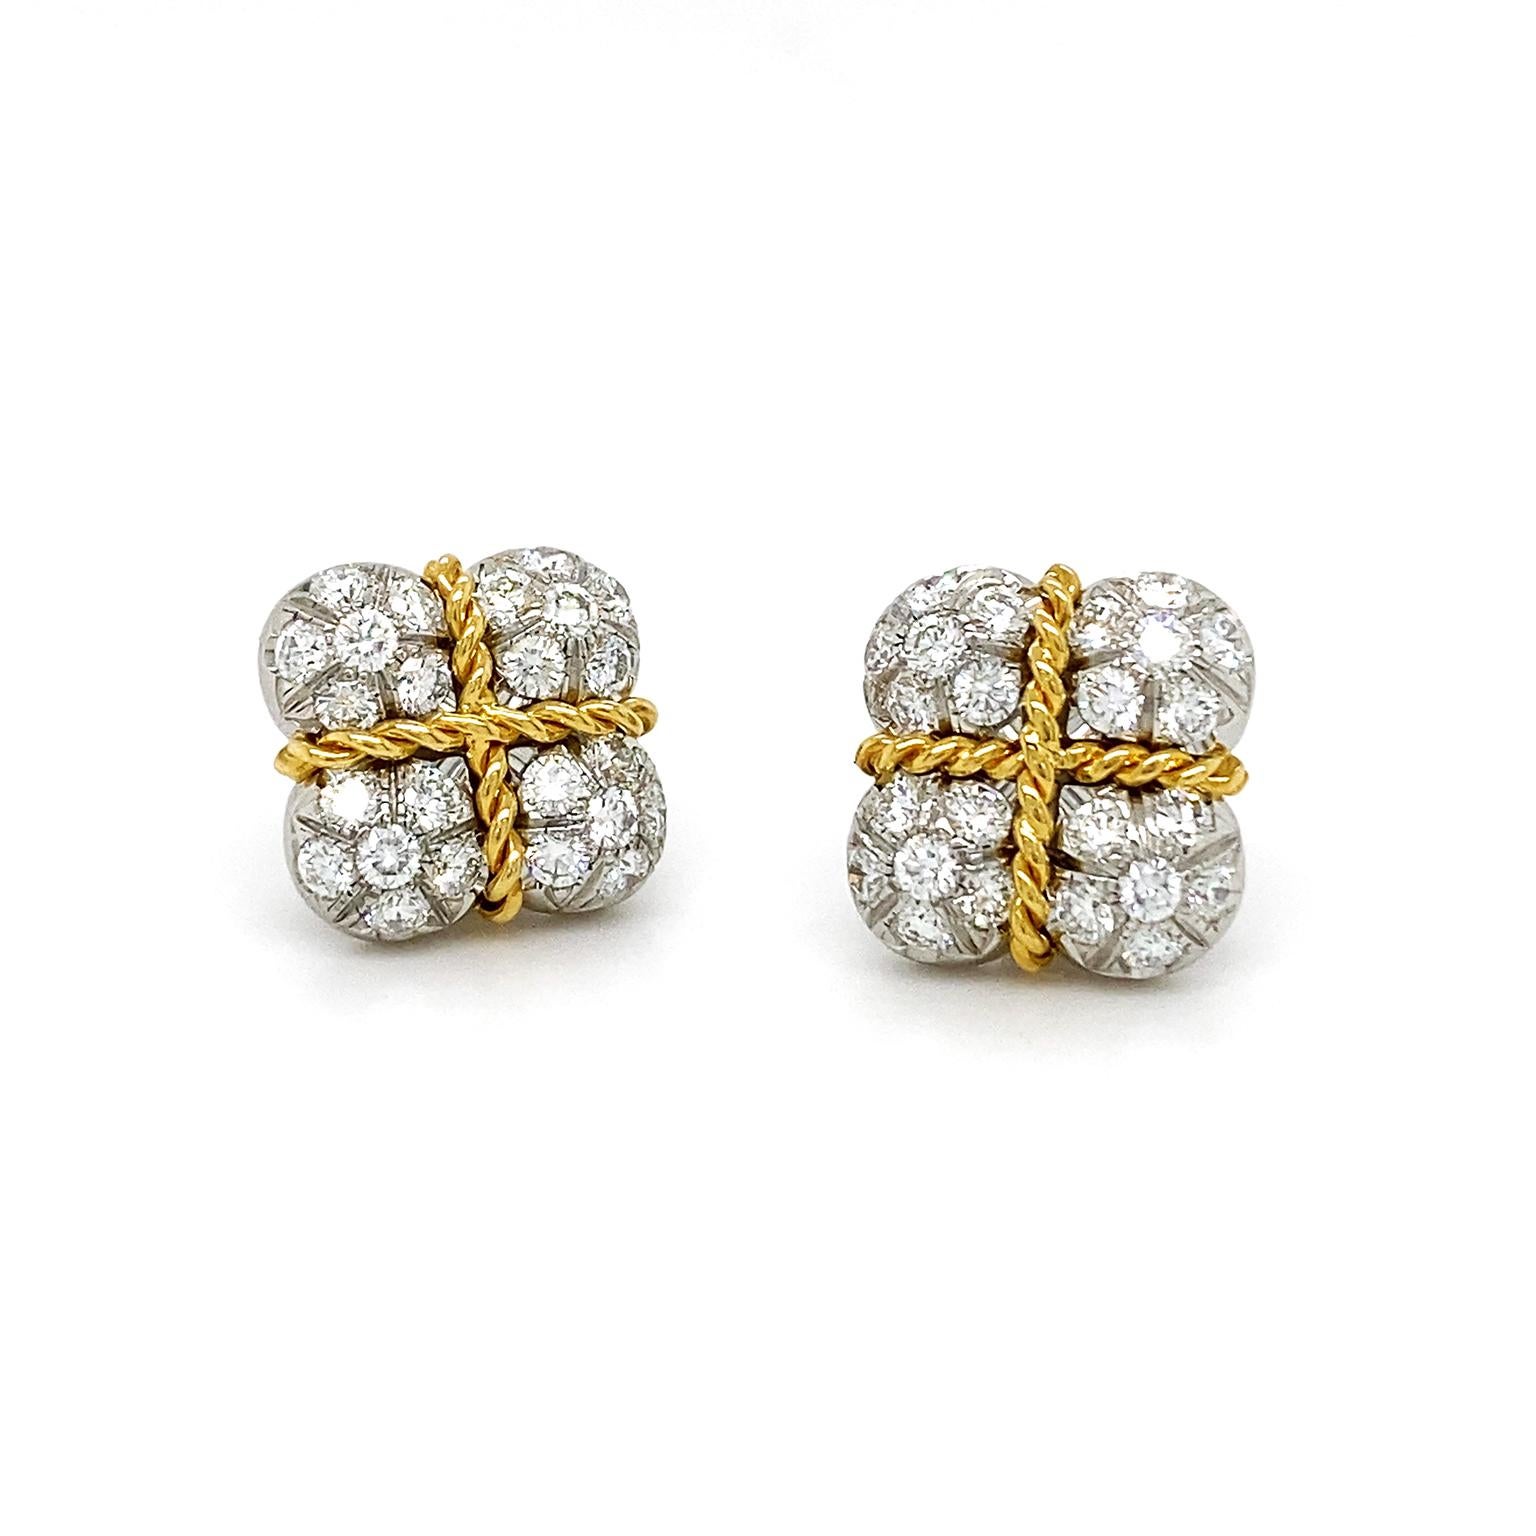 Inspired by a wrapped gift, these earrings beam with radiance. Set in platinum, glittering brilliant cut diamonds illustrate the gift box. 18k yellow gold braids overlap to represent a snug string, forming rounded quadrants of diamonds, which total